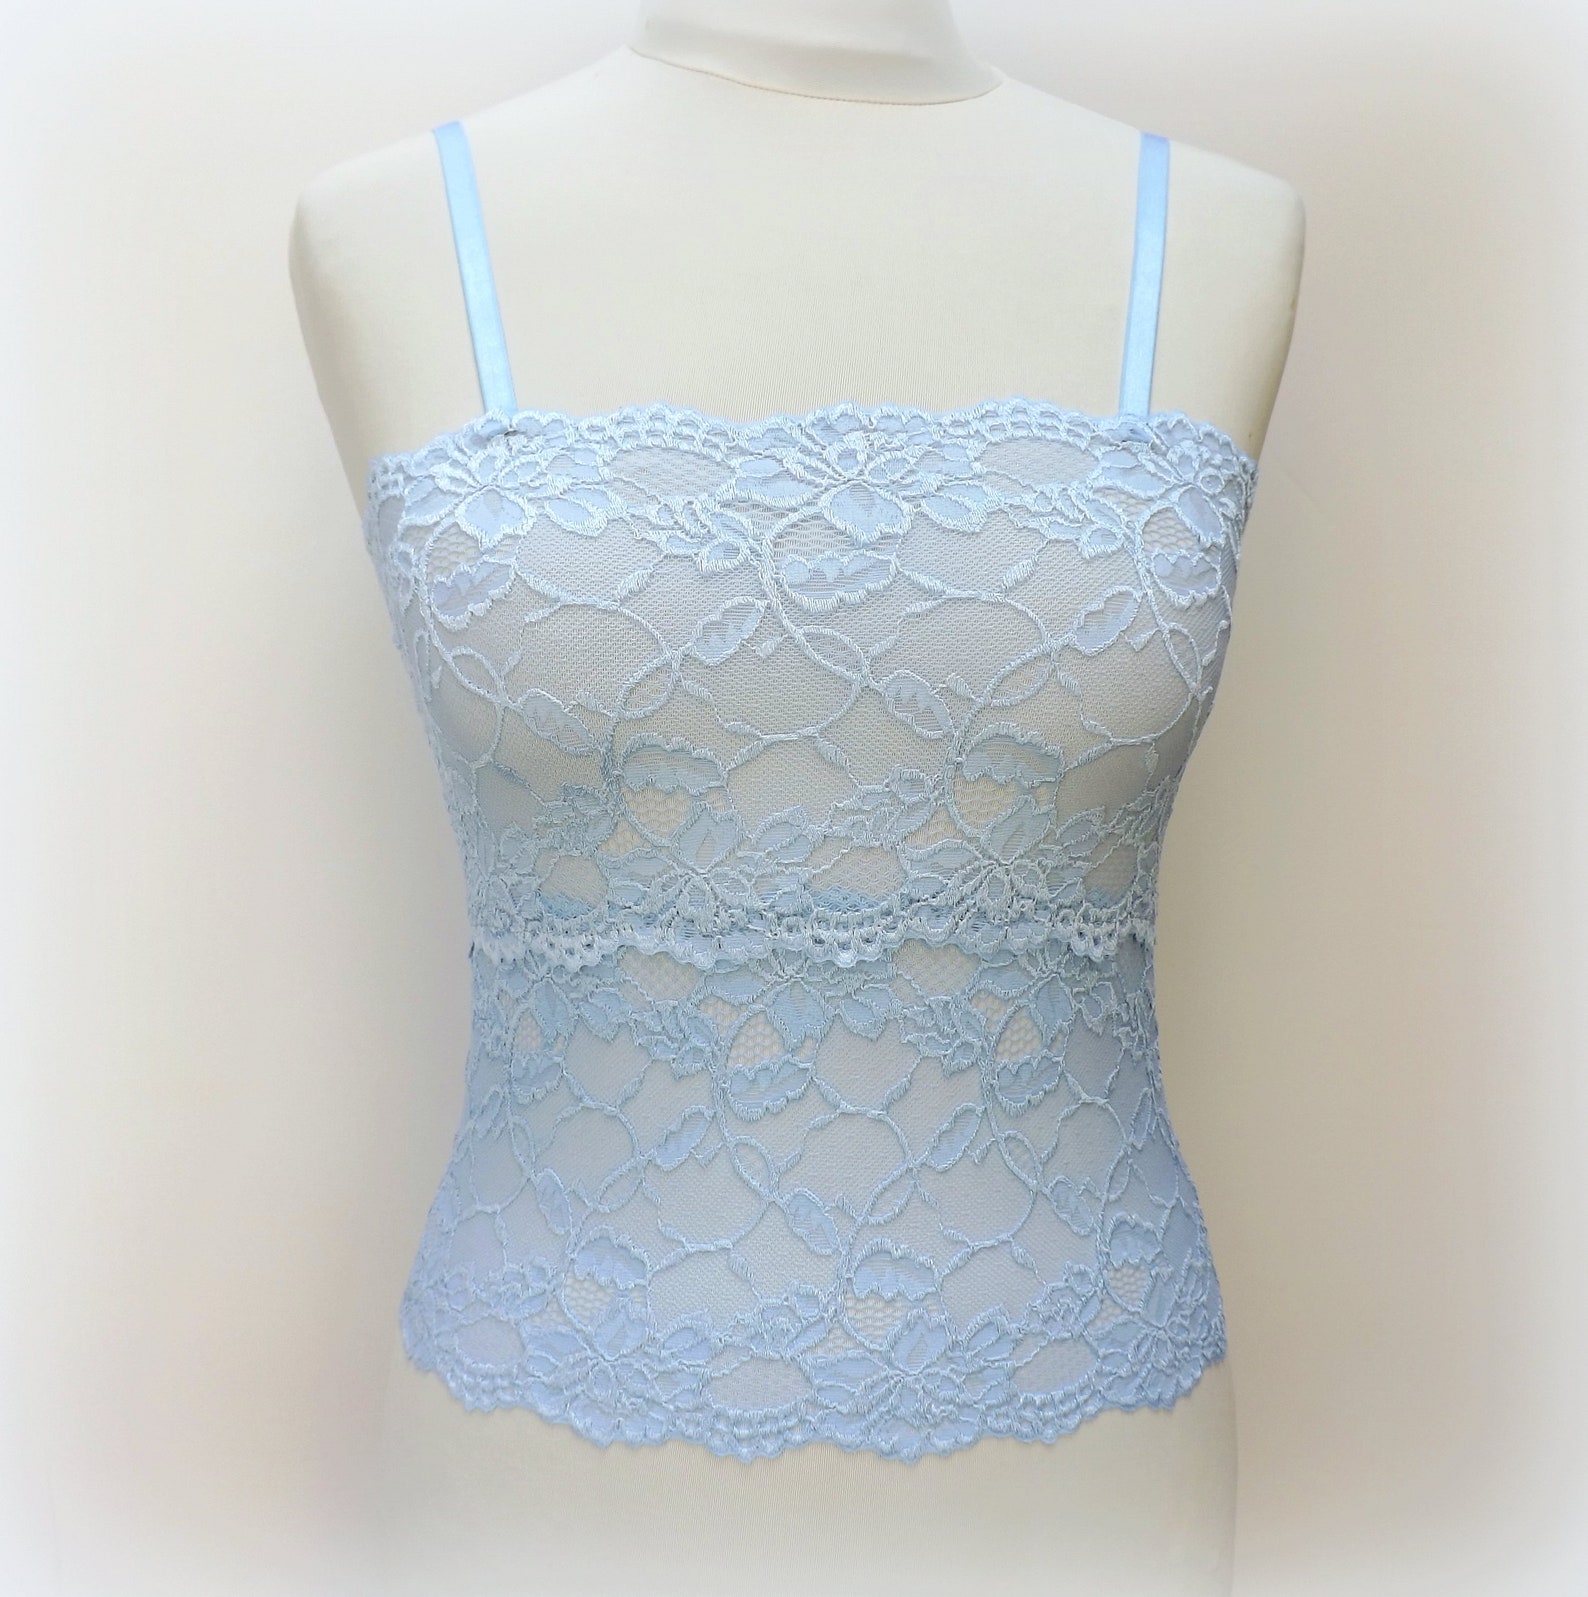 Light blue see through elastic lace tank top camisole | Etsy